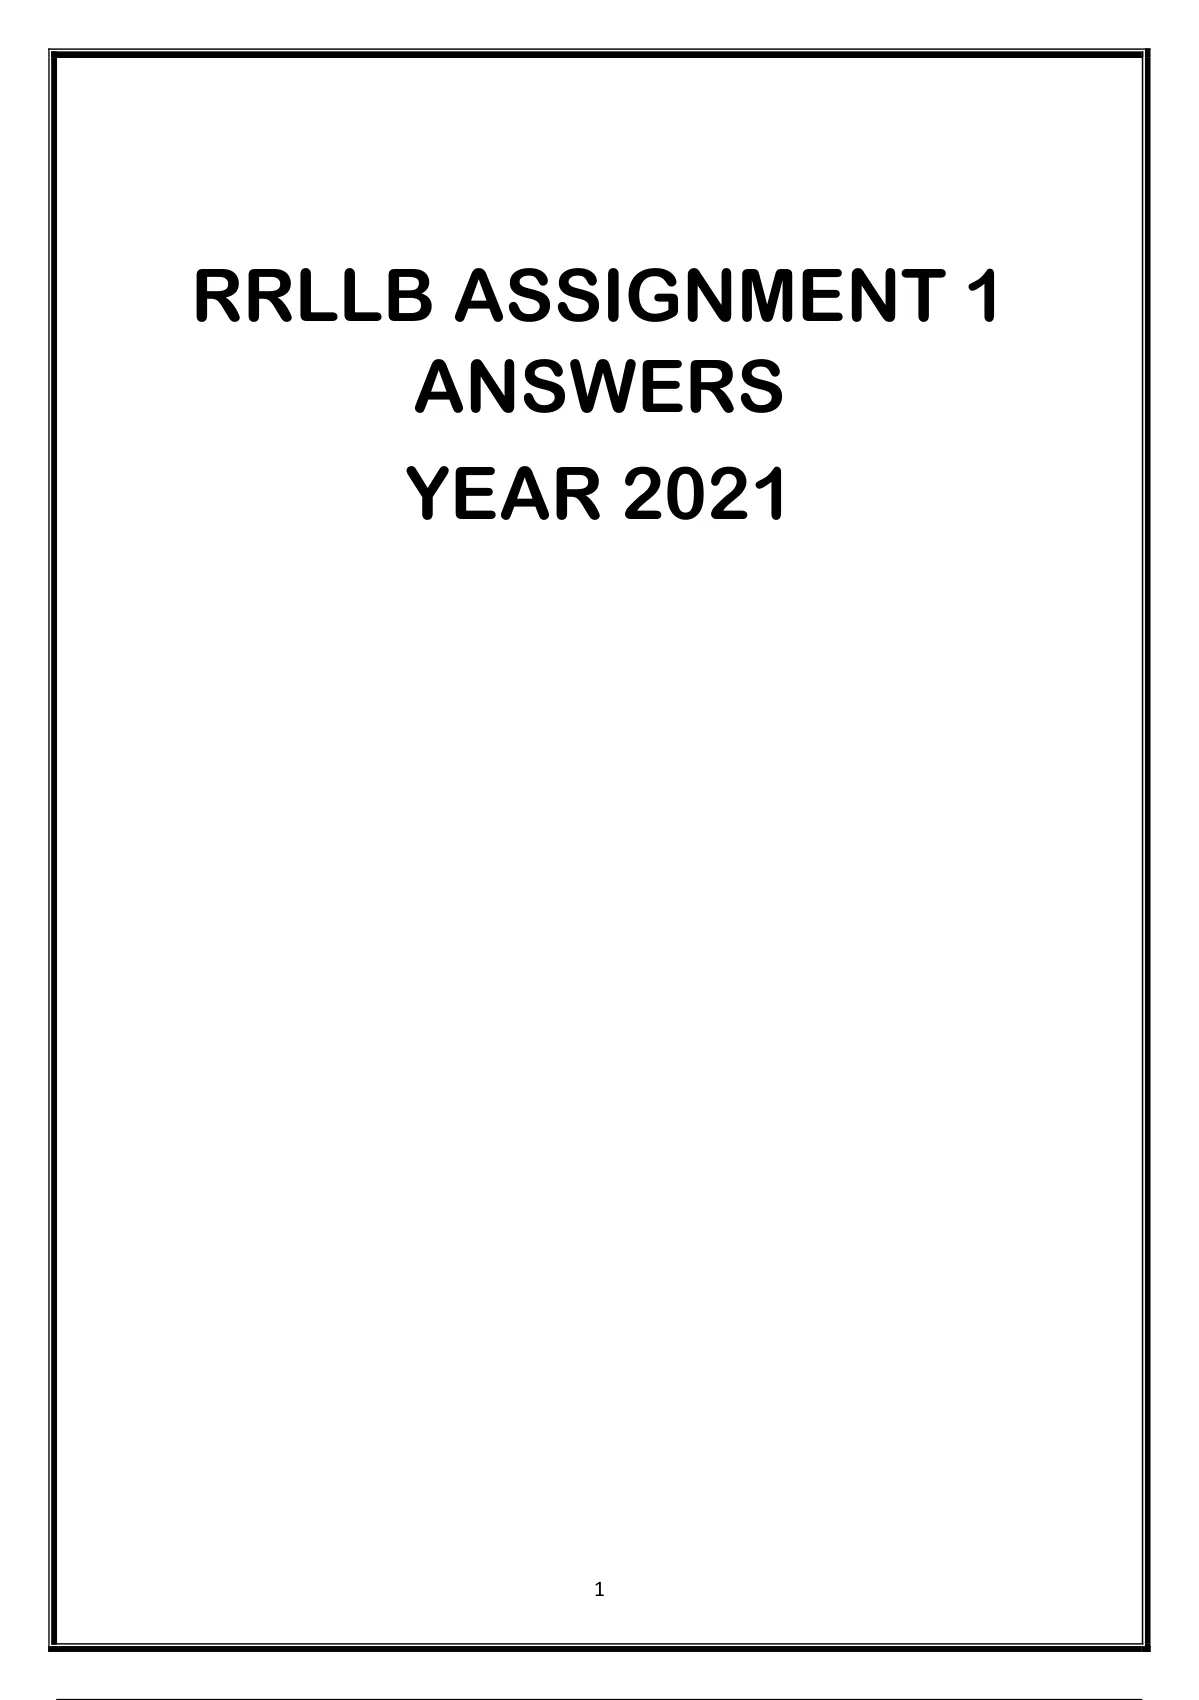 rrllb81 assignment 2 example